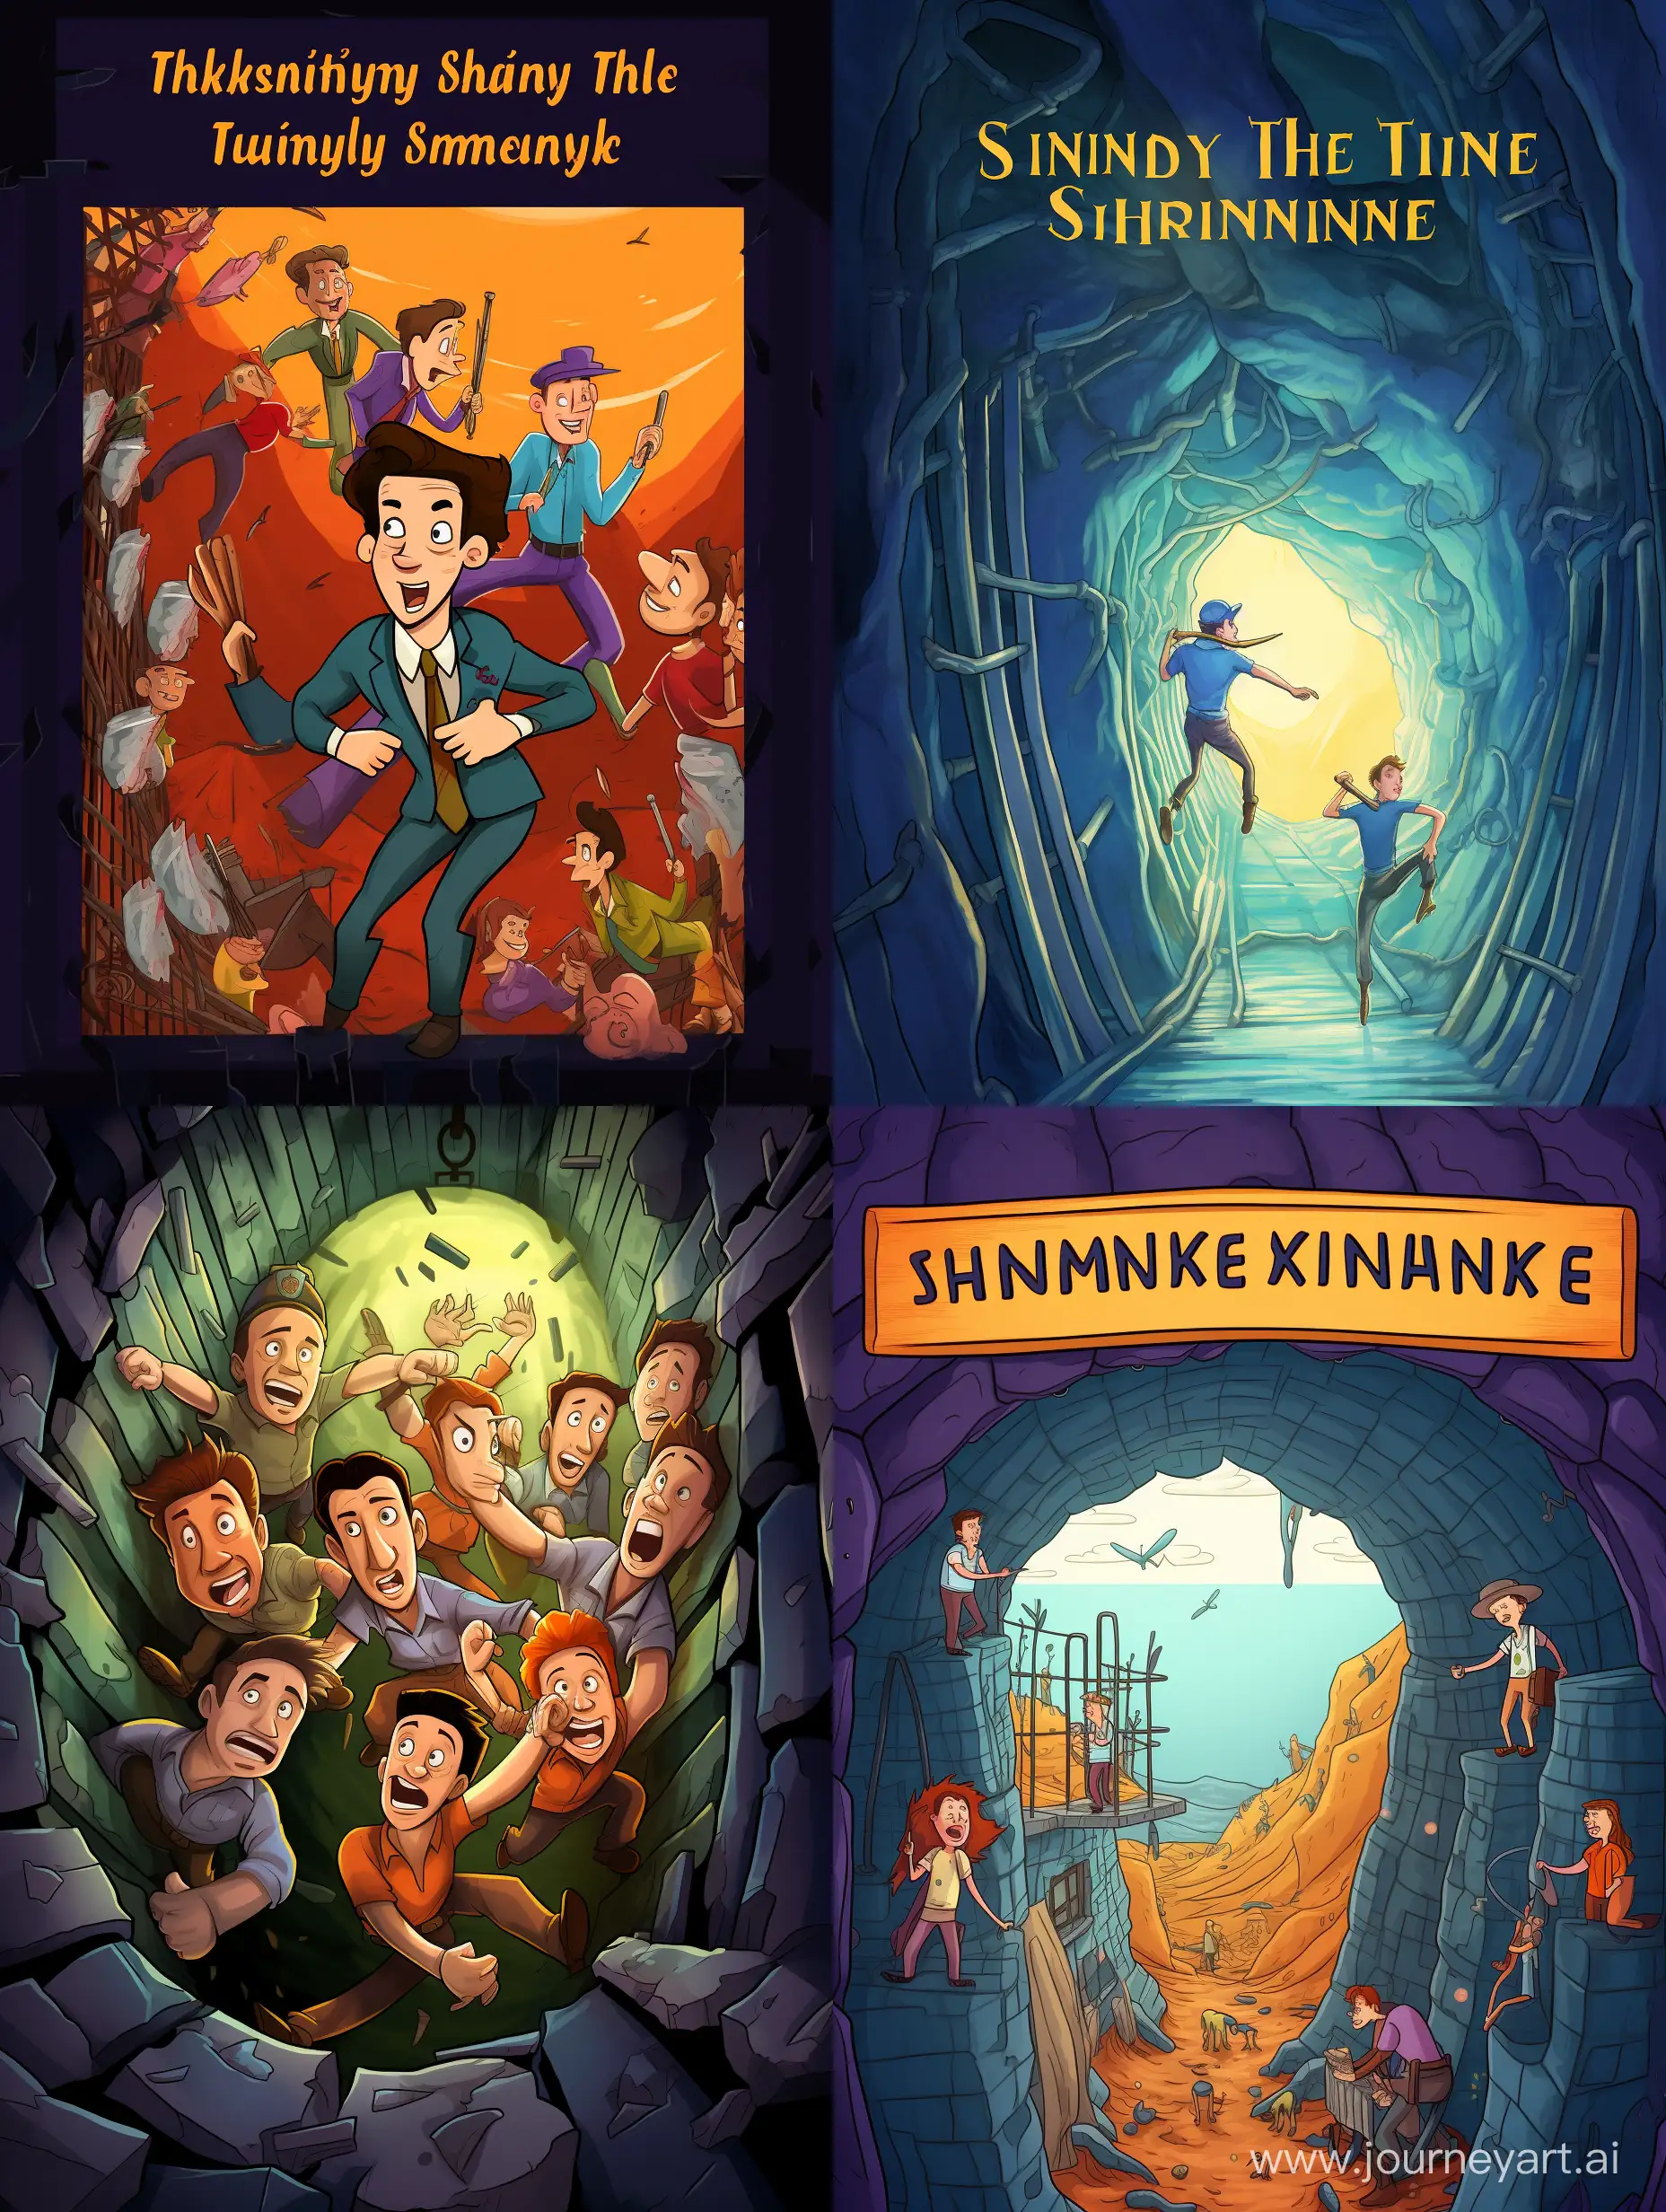 illustrate a whimsical and cartoonish scene capturing the essence of "The Shawshank Redemption." Imagine a group of lively, anthropomorphic prison characters working together on a daring escape plan. Picture the iconic scene of Andy Dufresne tunneling through his cell wall, but add a comical twist to the characters and the setting. Infuse the illustration with vibrant colors and playful details that hint at the challenges and camaraderie within the prison walls. Be sure to highlight key elements that fans of the movie will recognize, making it an engaging visual challenge for players to guess the movie.